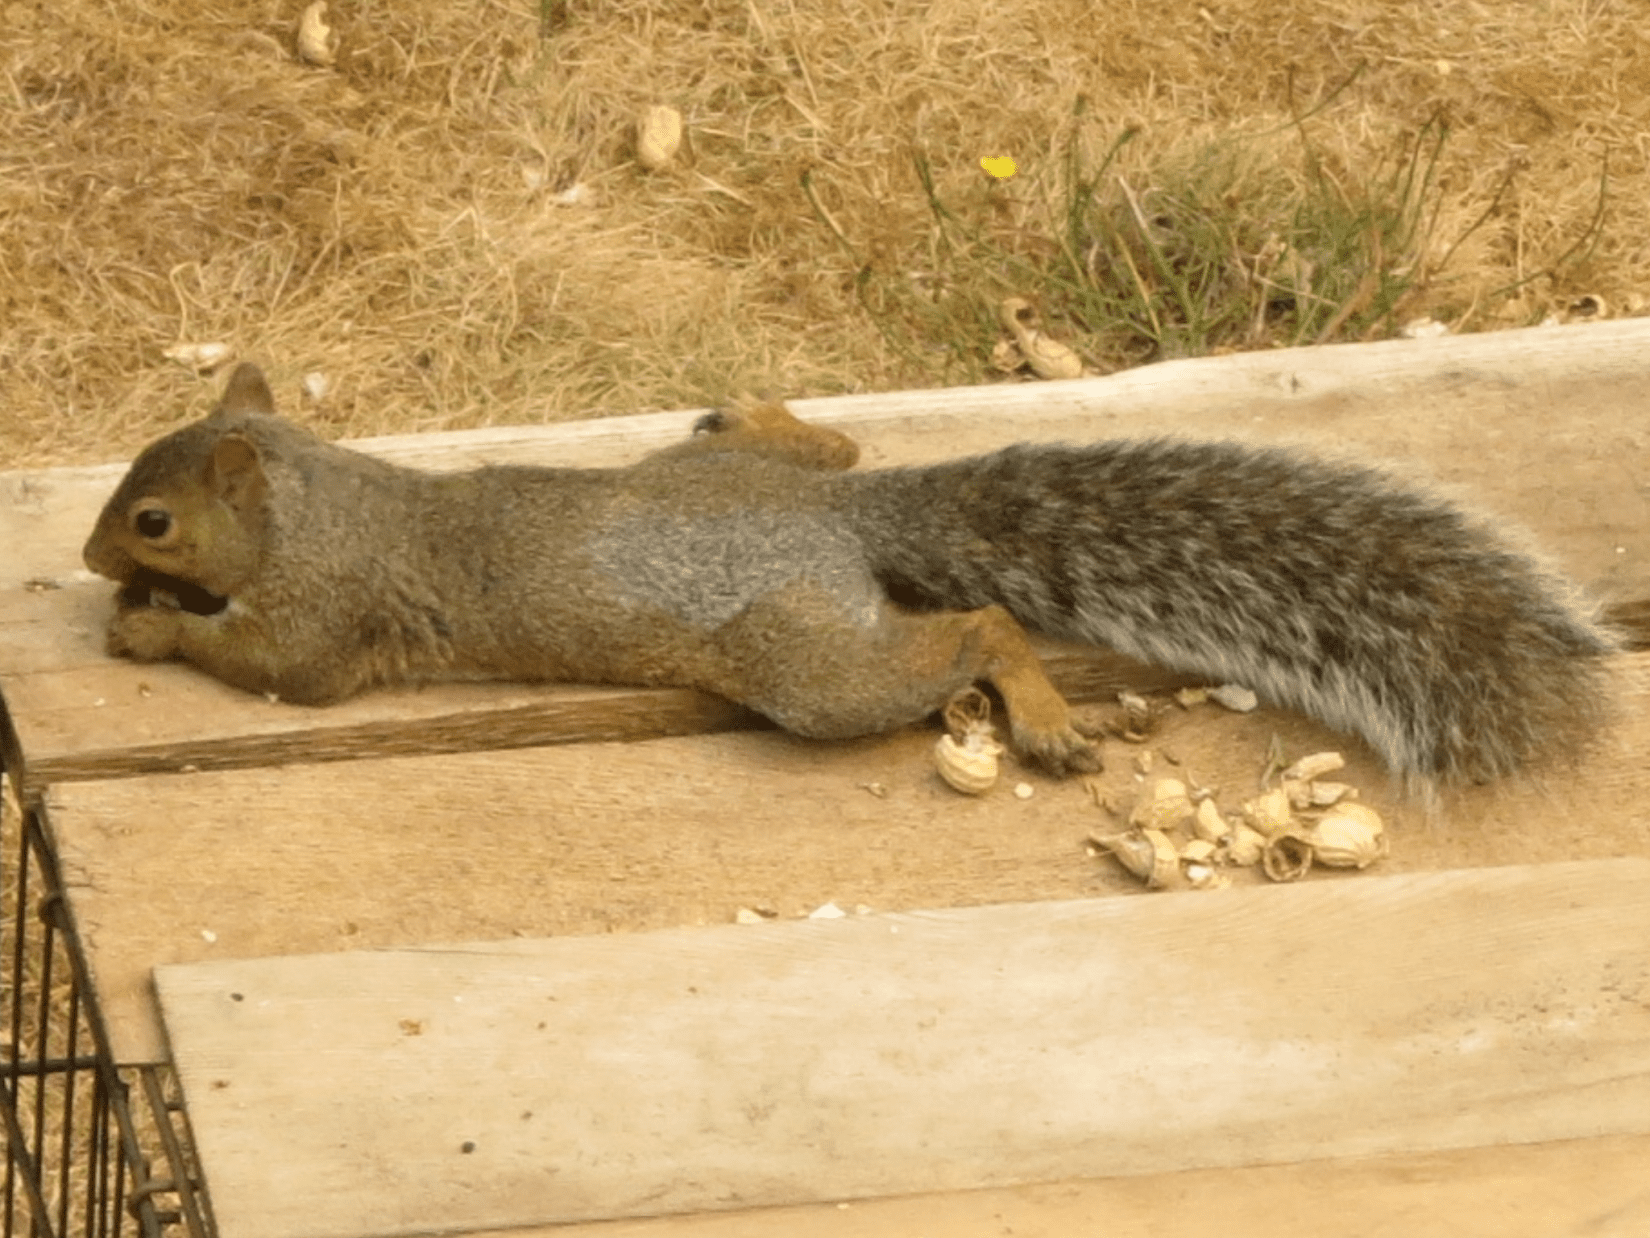 Squirrel being fed peanuts on a table outside